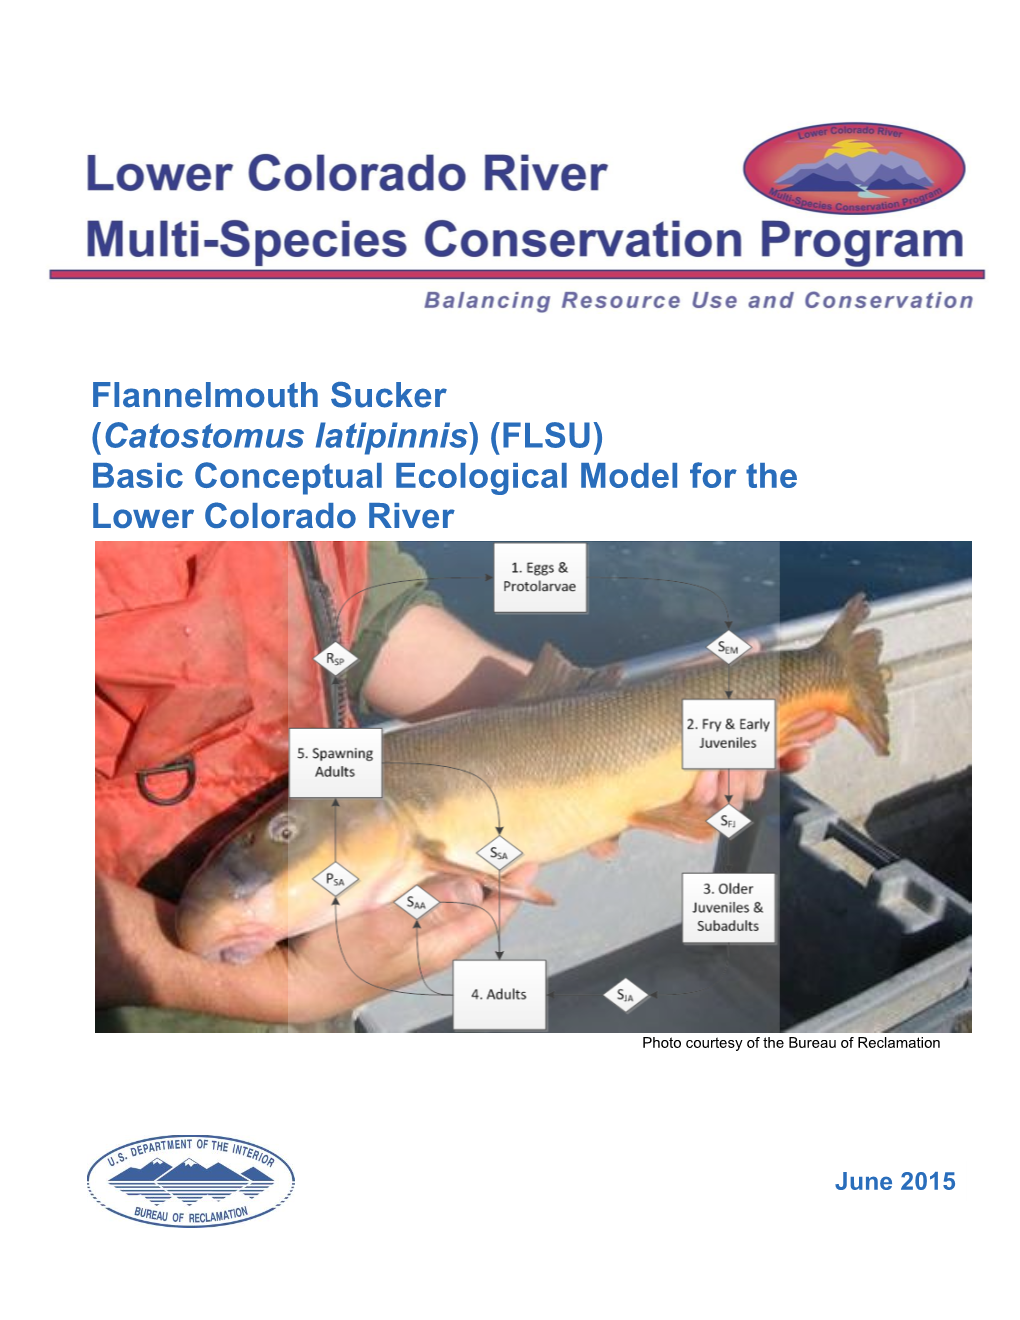 Flannelmouth Sucker (Catostomus Latipinnis) (FLSU) Basic Conceptual Ecological Model for the Lower Colorado River